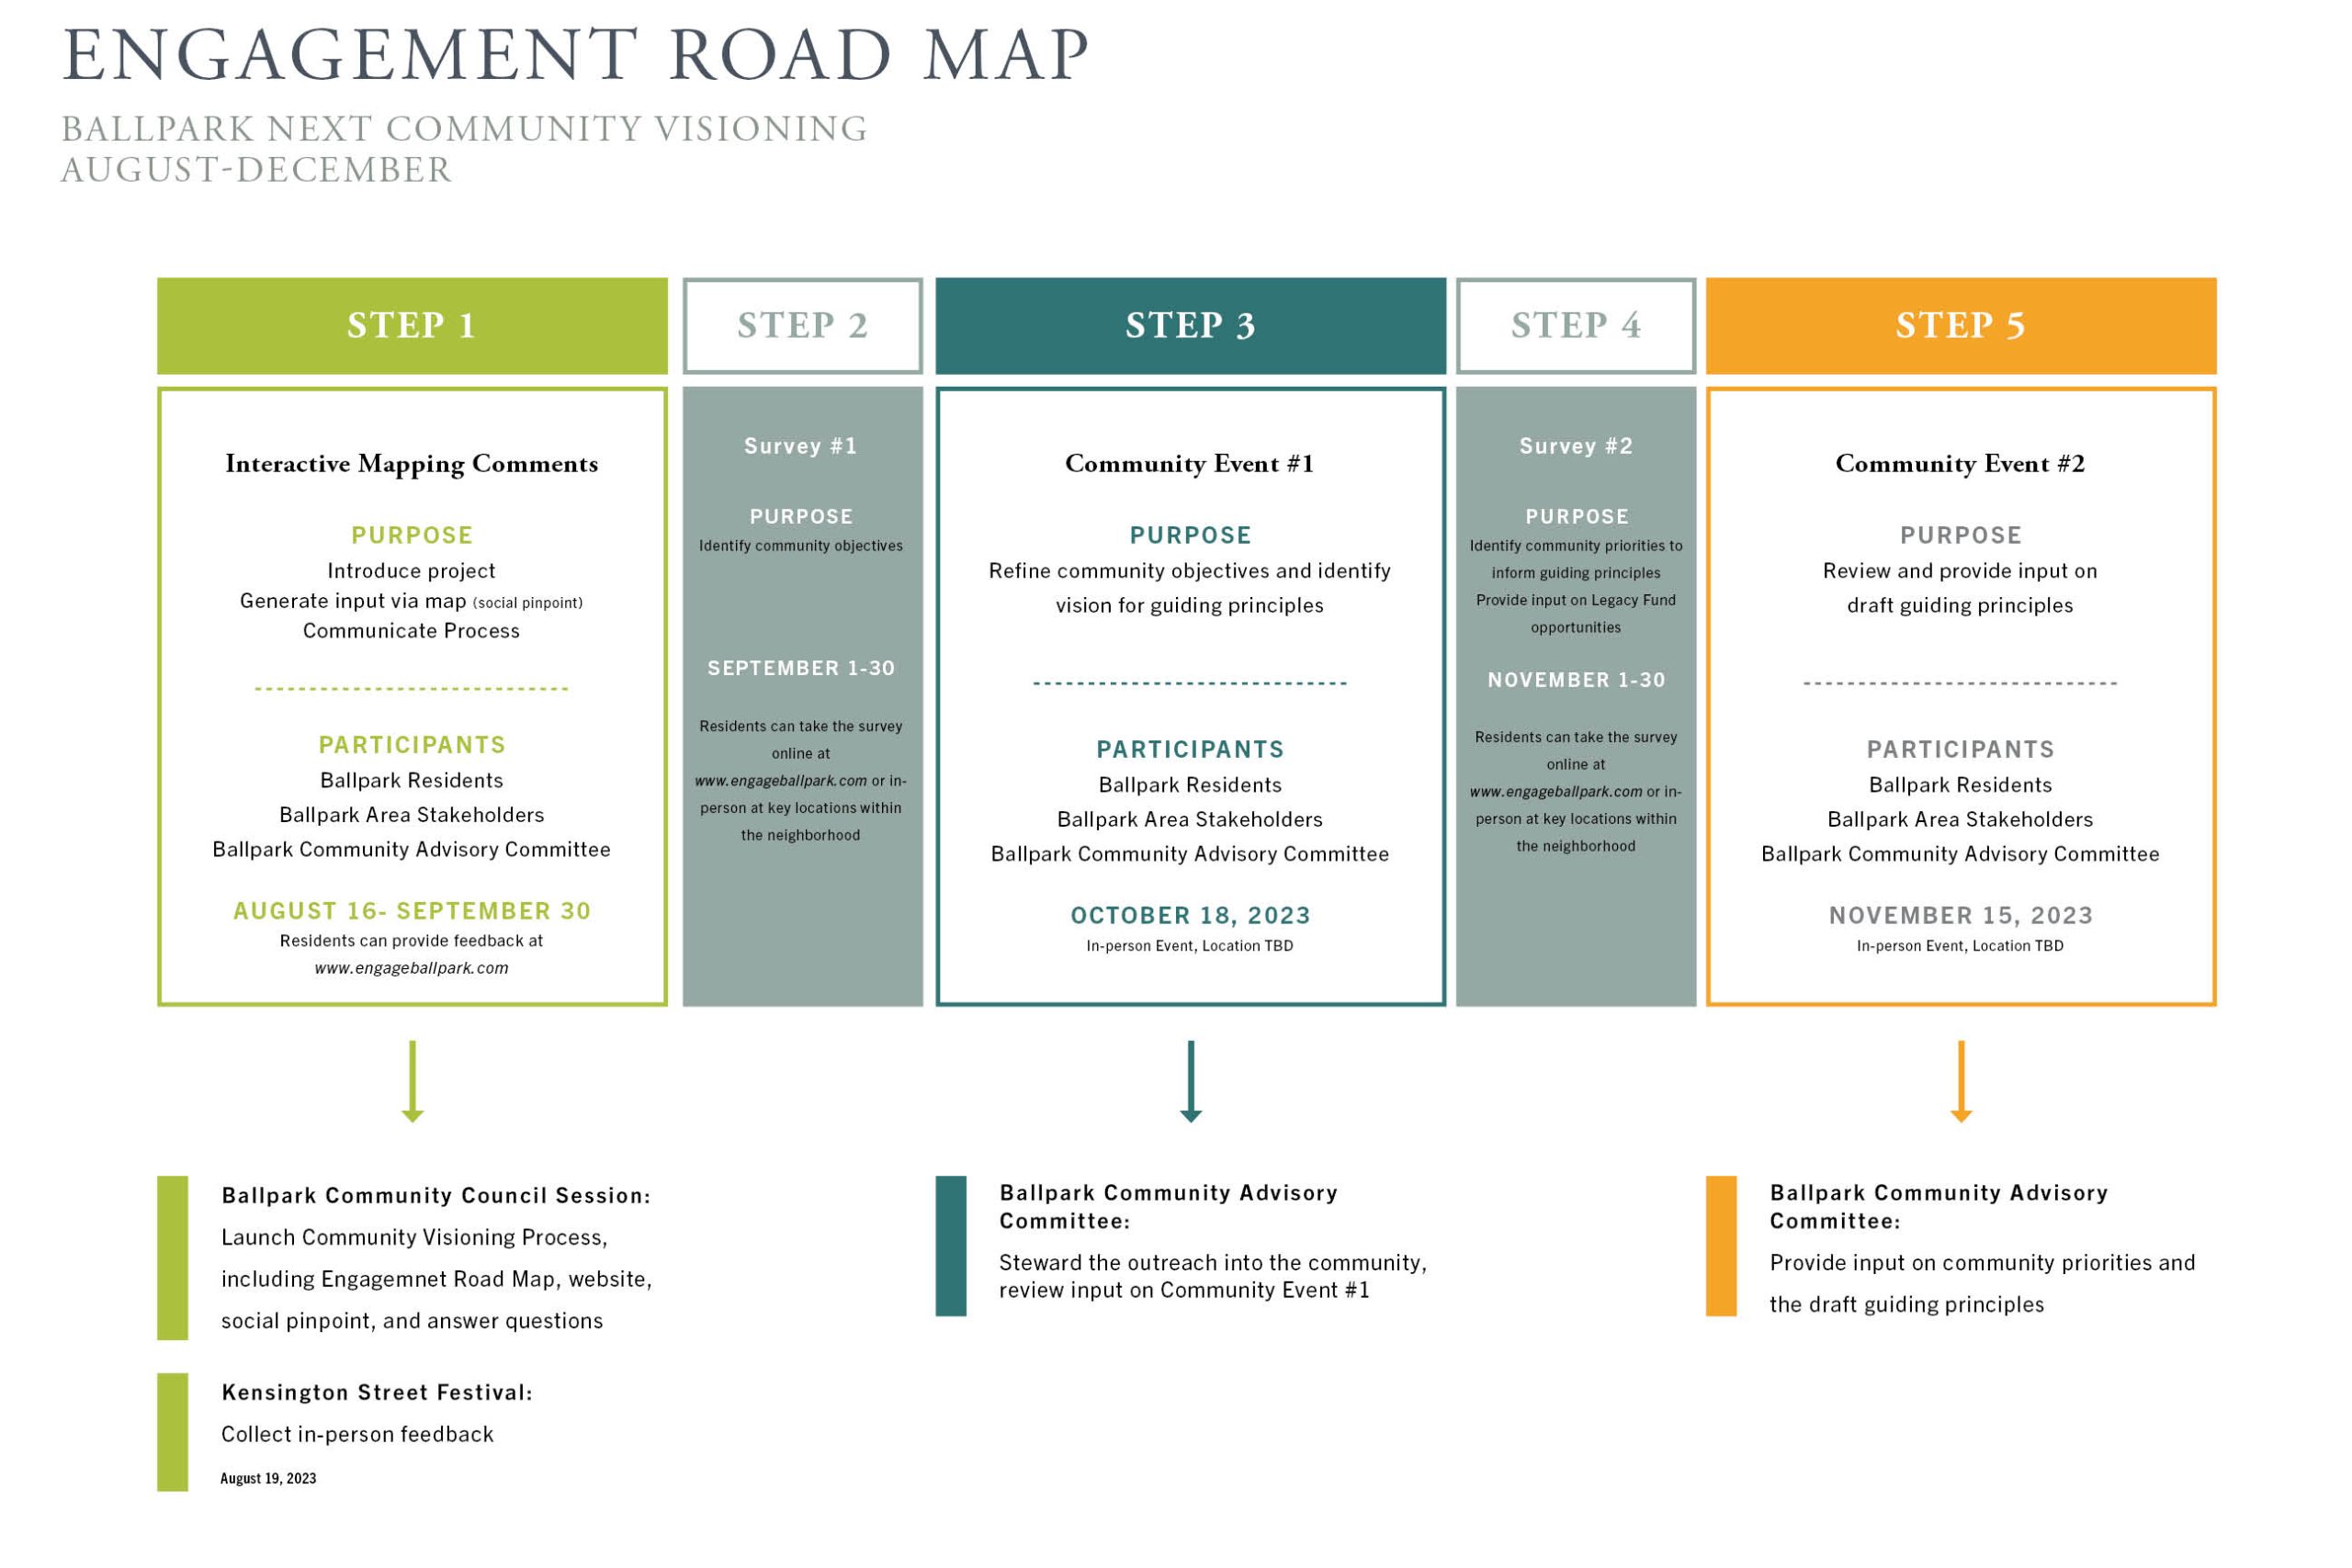 Engagement Roadmap graphic for BallparkNEXT